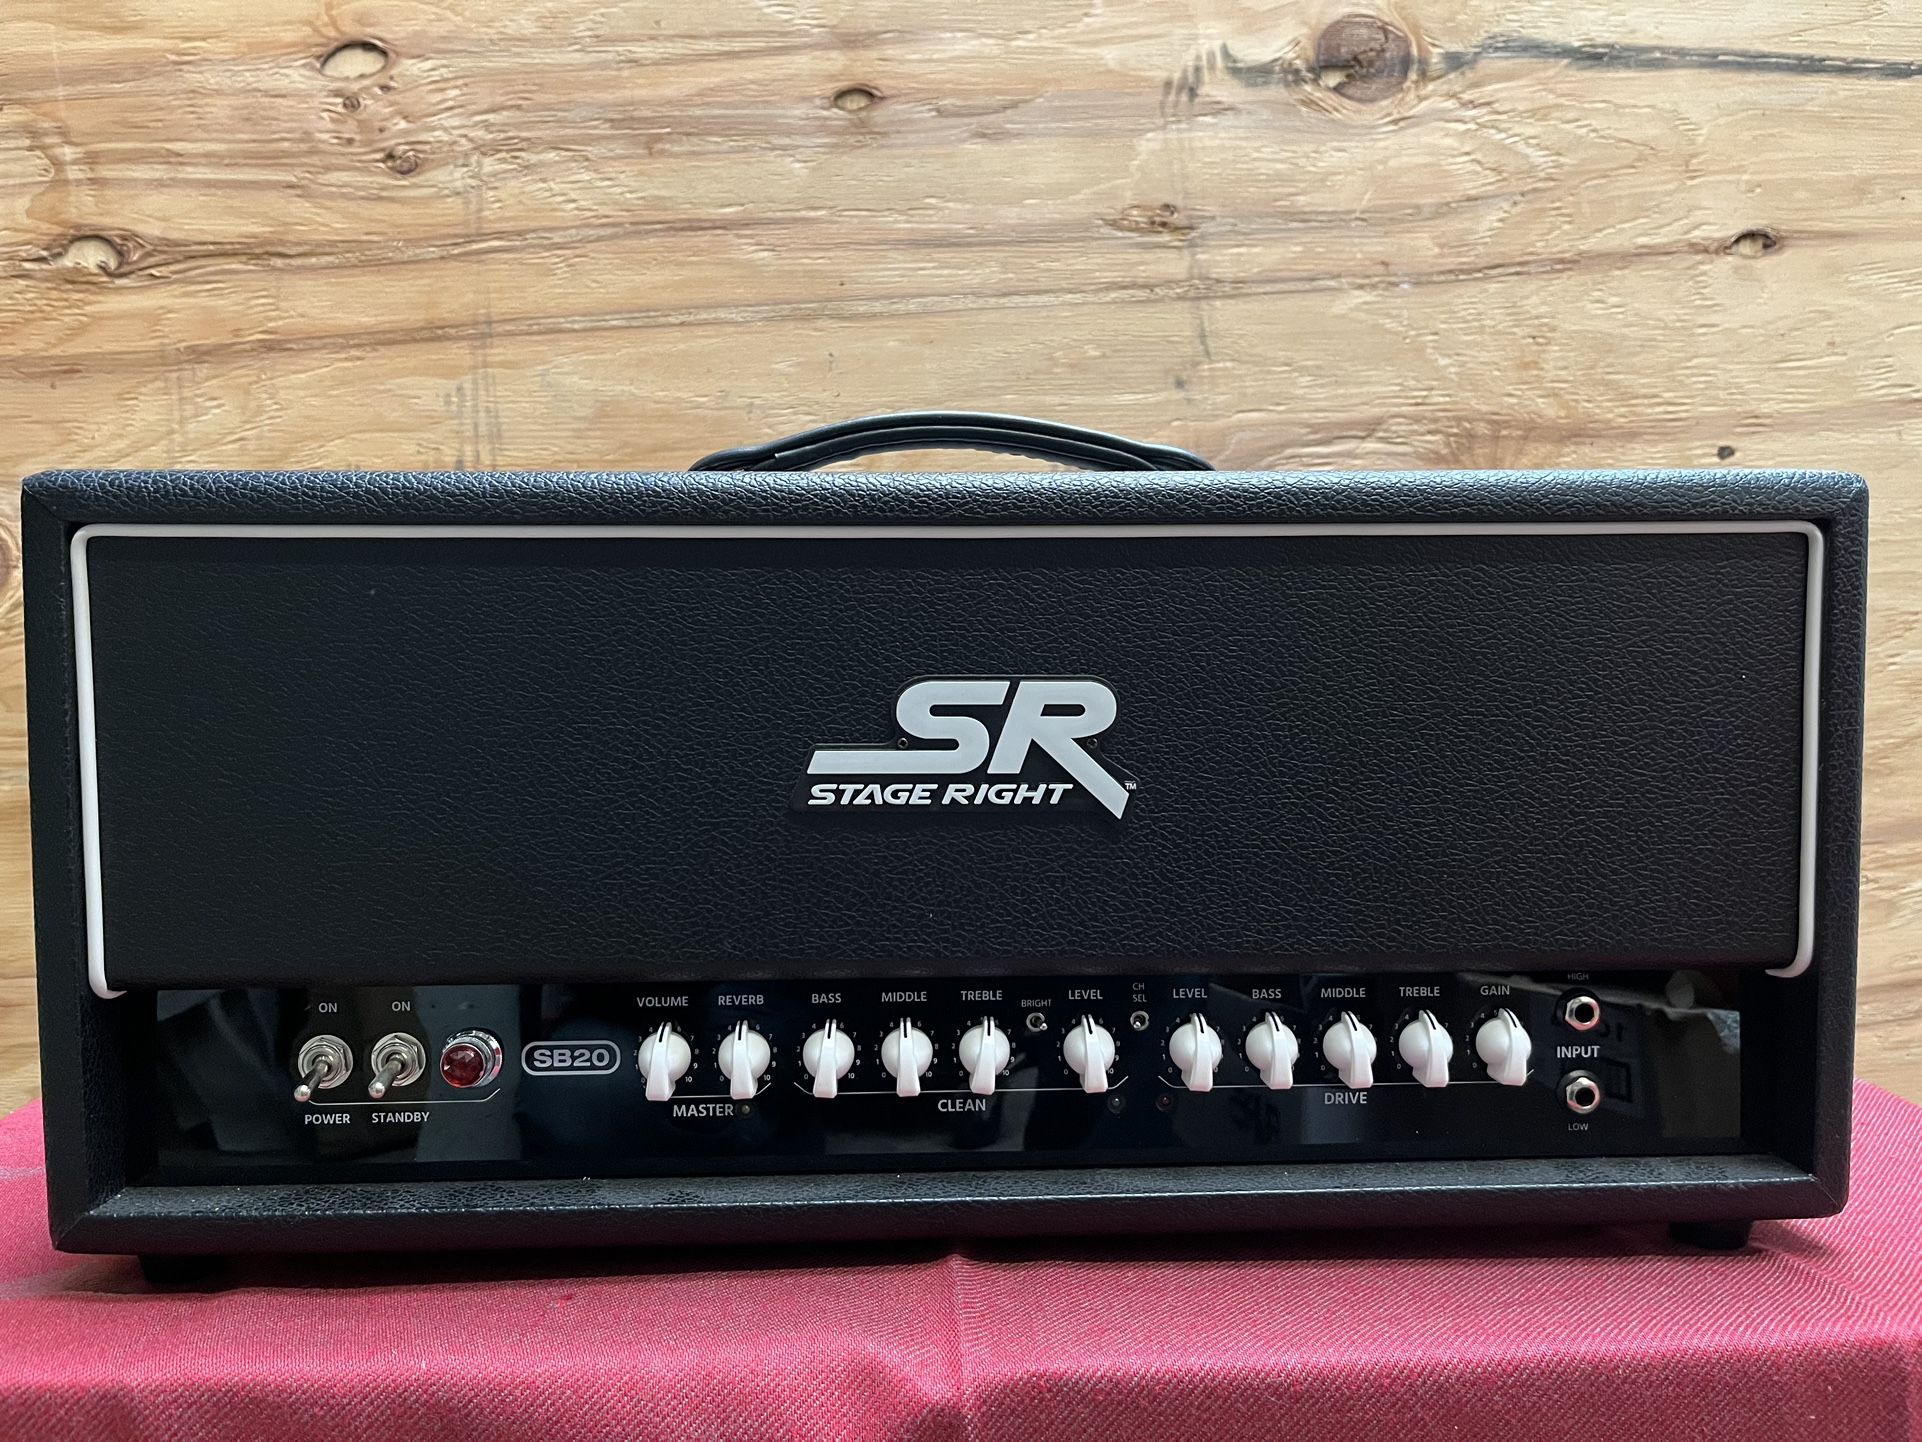 Stage Right SB 20 Amplifier